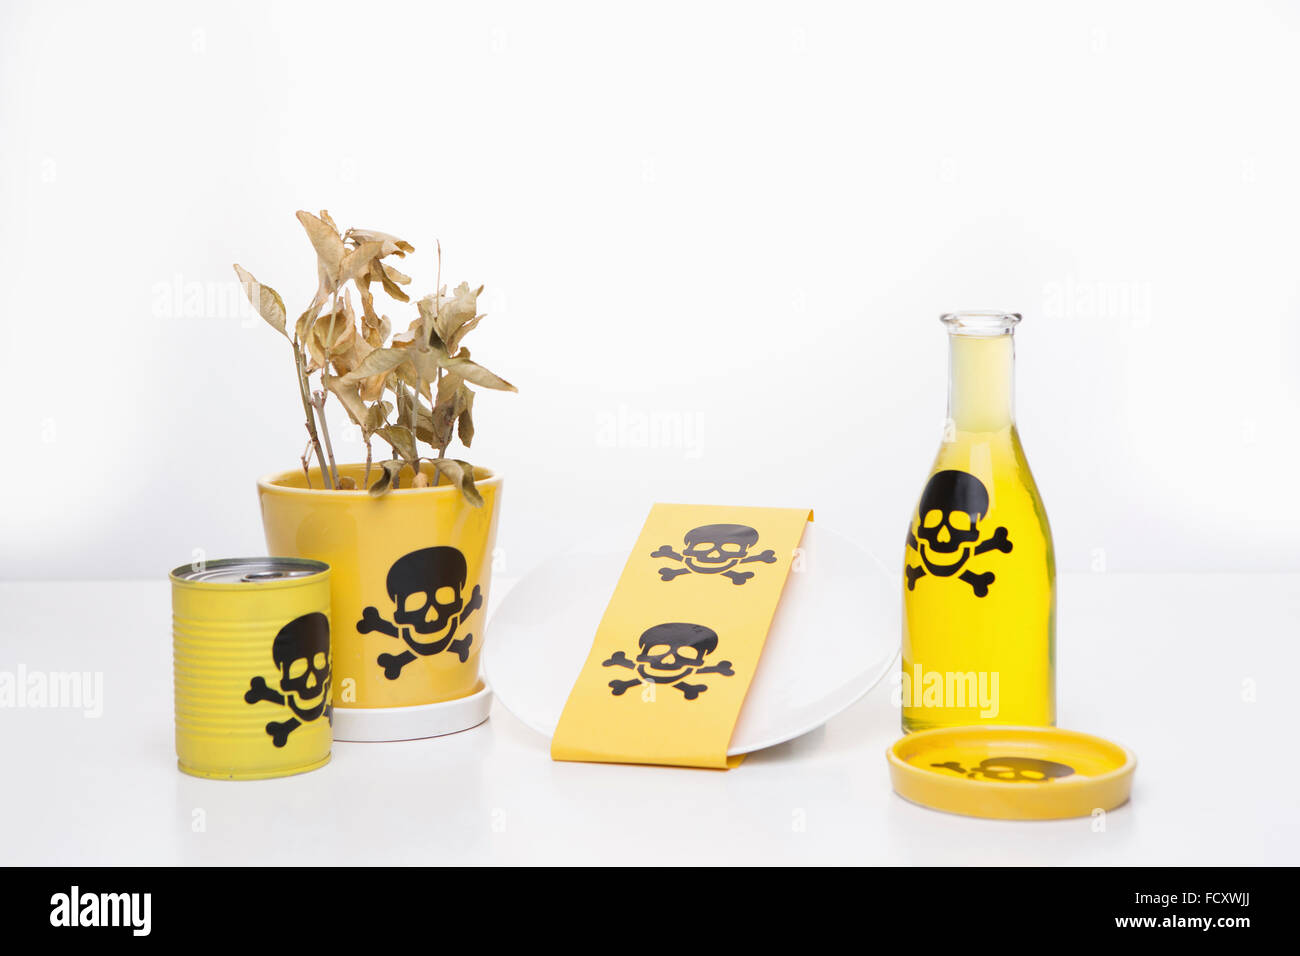 Objects for warning of danger of nuclear energy Stock Photo